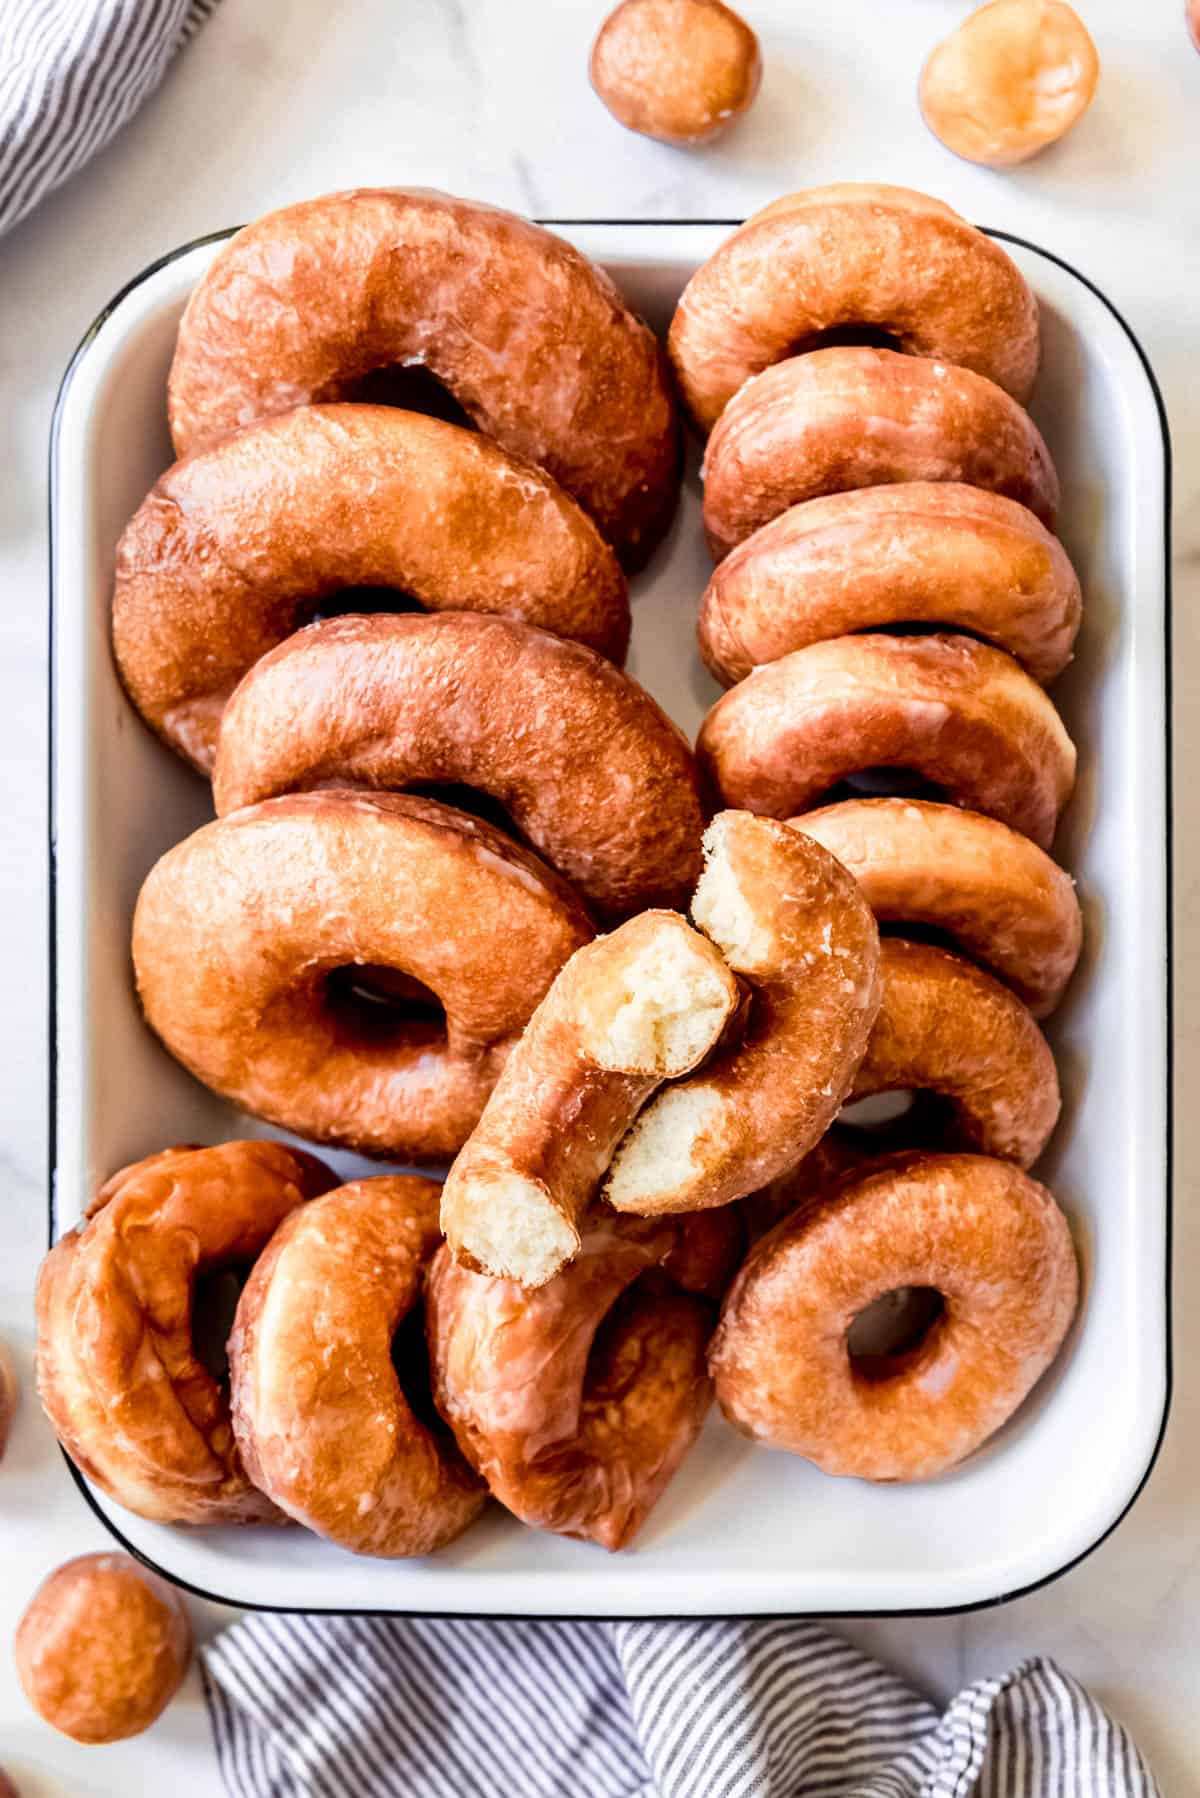 Glazed donuts in a pan.